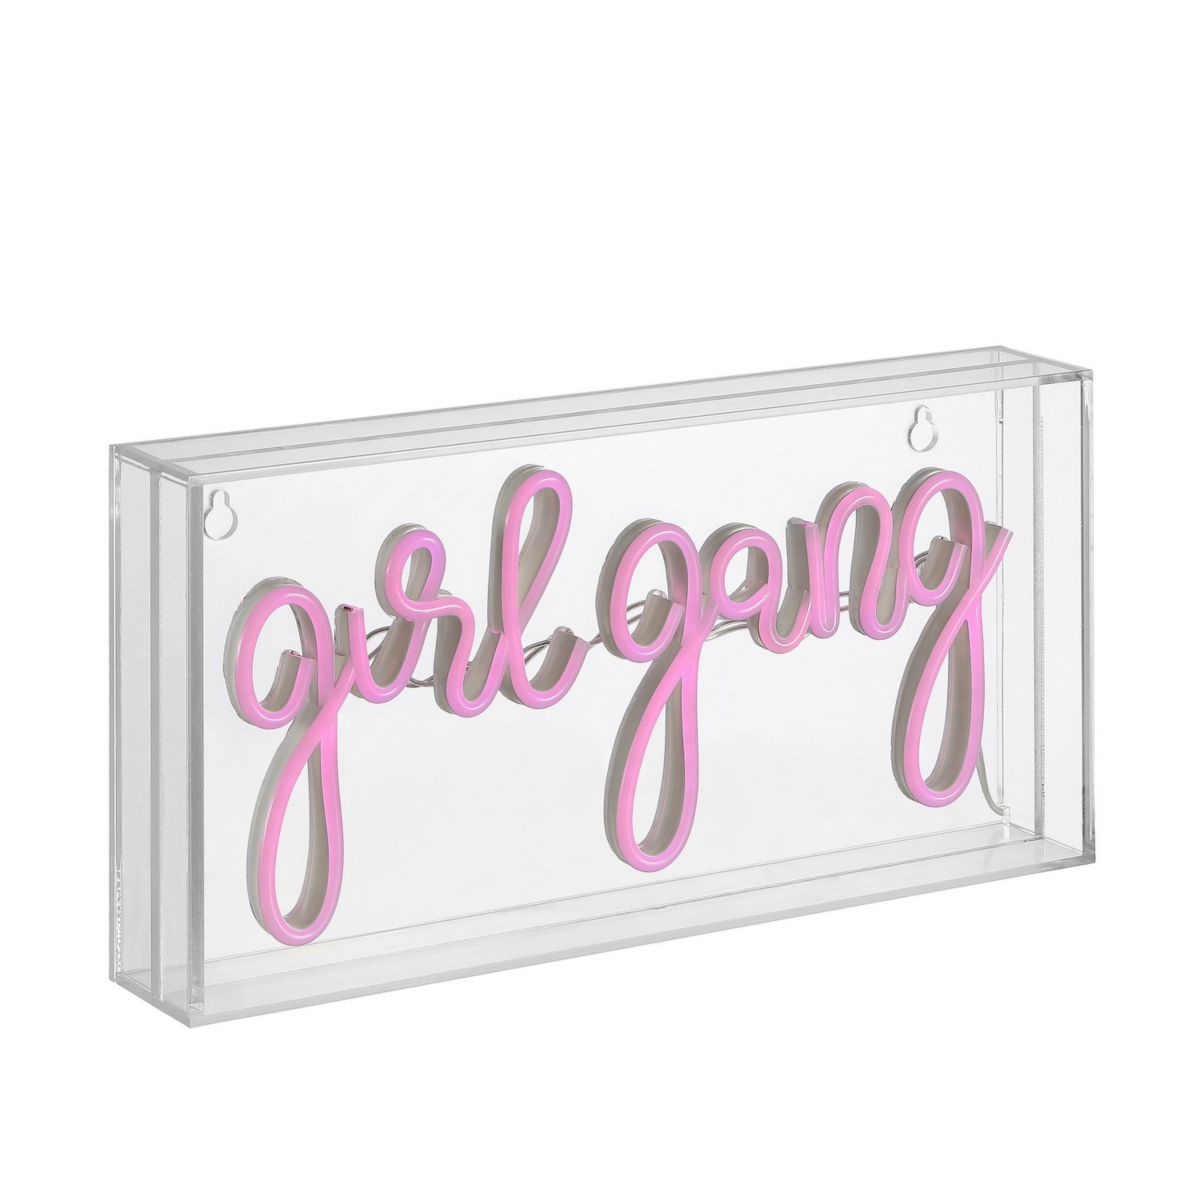 Girl Gang Contemporary Glam Acrylic Box Usb Operated Led Neon Light Jonathan Y Designs